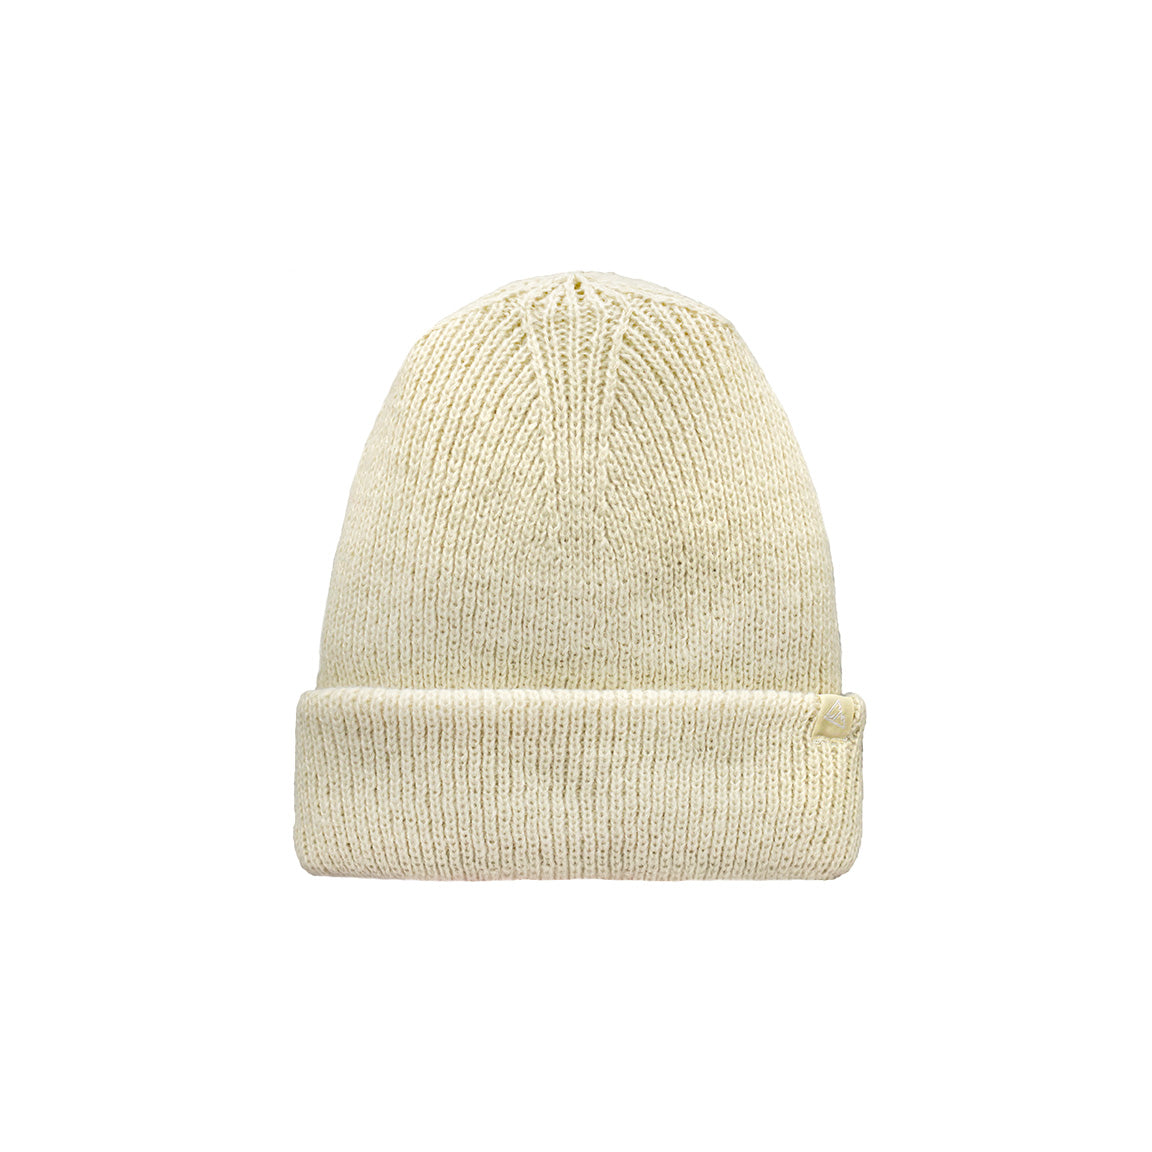 Displayed is a cream-colored knitted beanie, ribbed throughout, featuring a folded cuff with a tiny triangular tag.